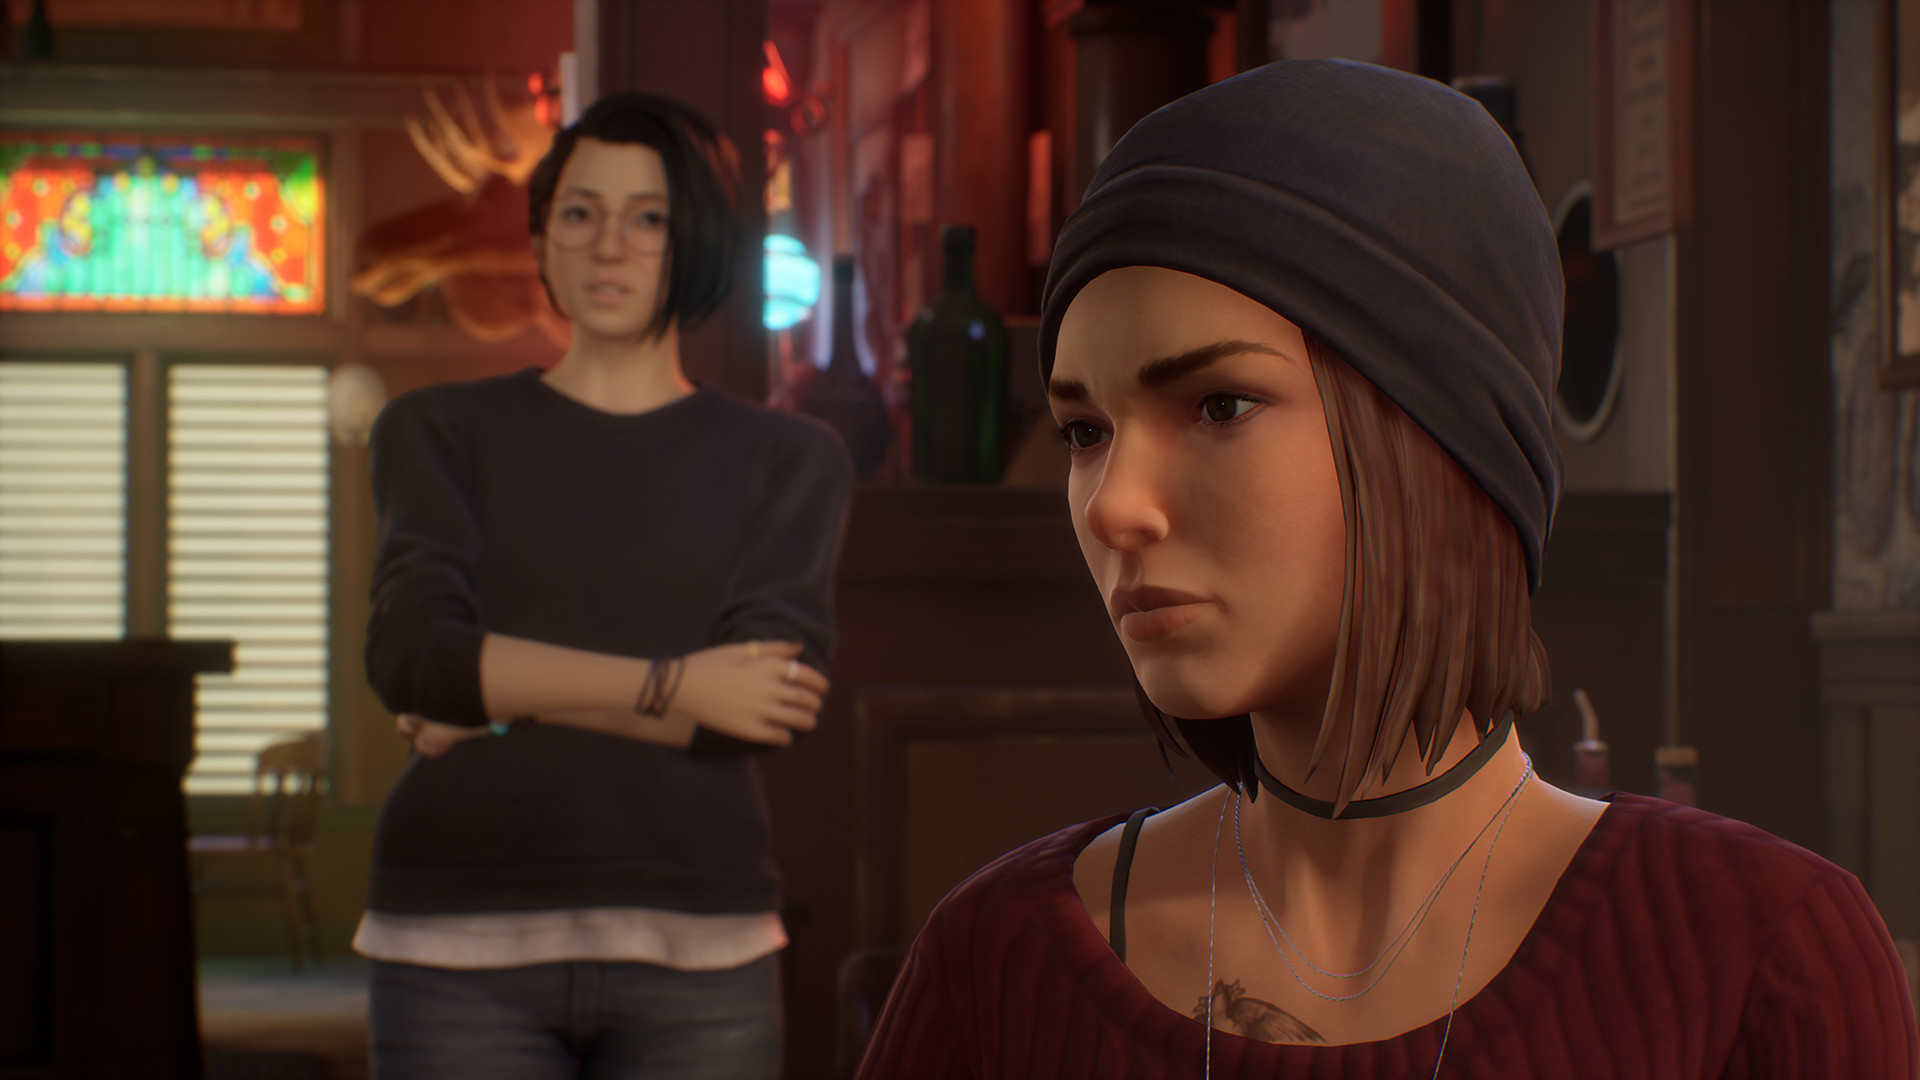 Life Is Strange: True Colors Deluxe Edition Steam Account